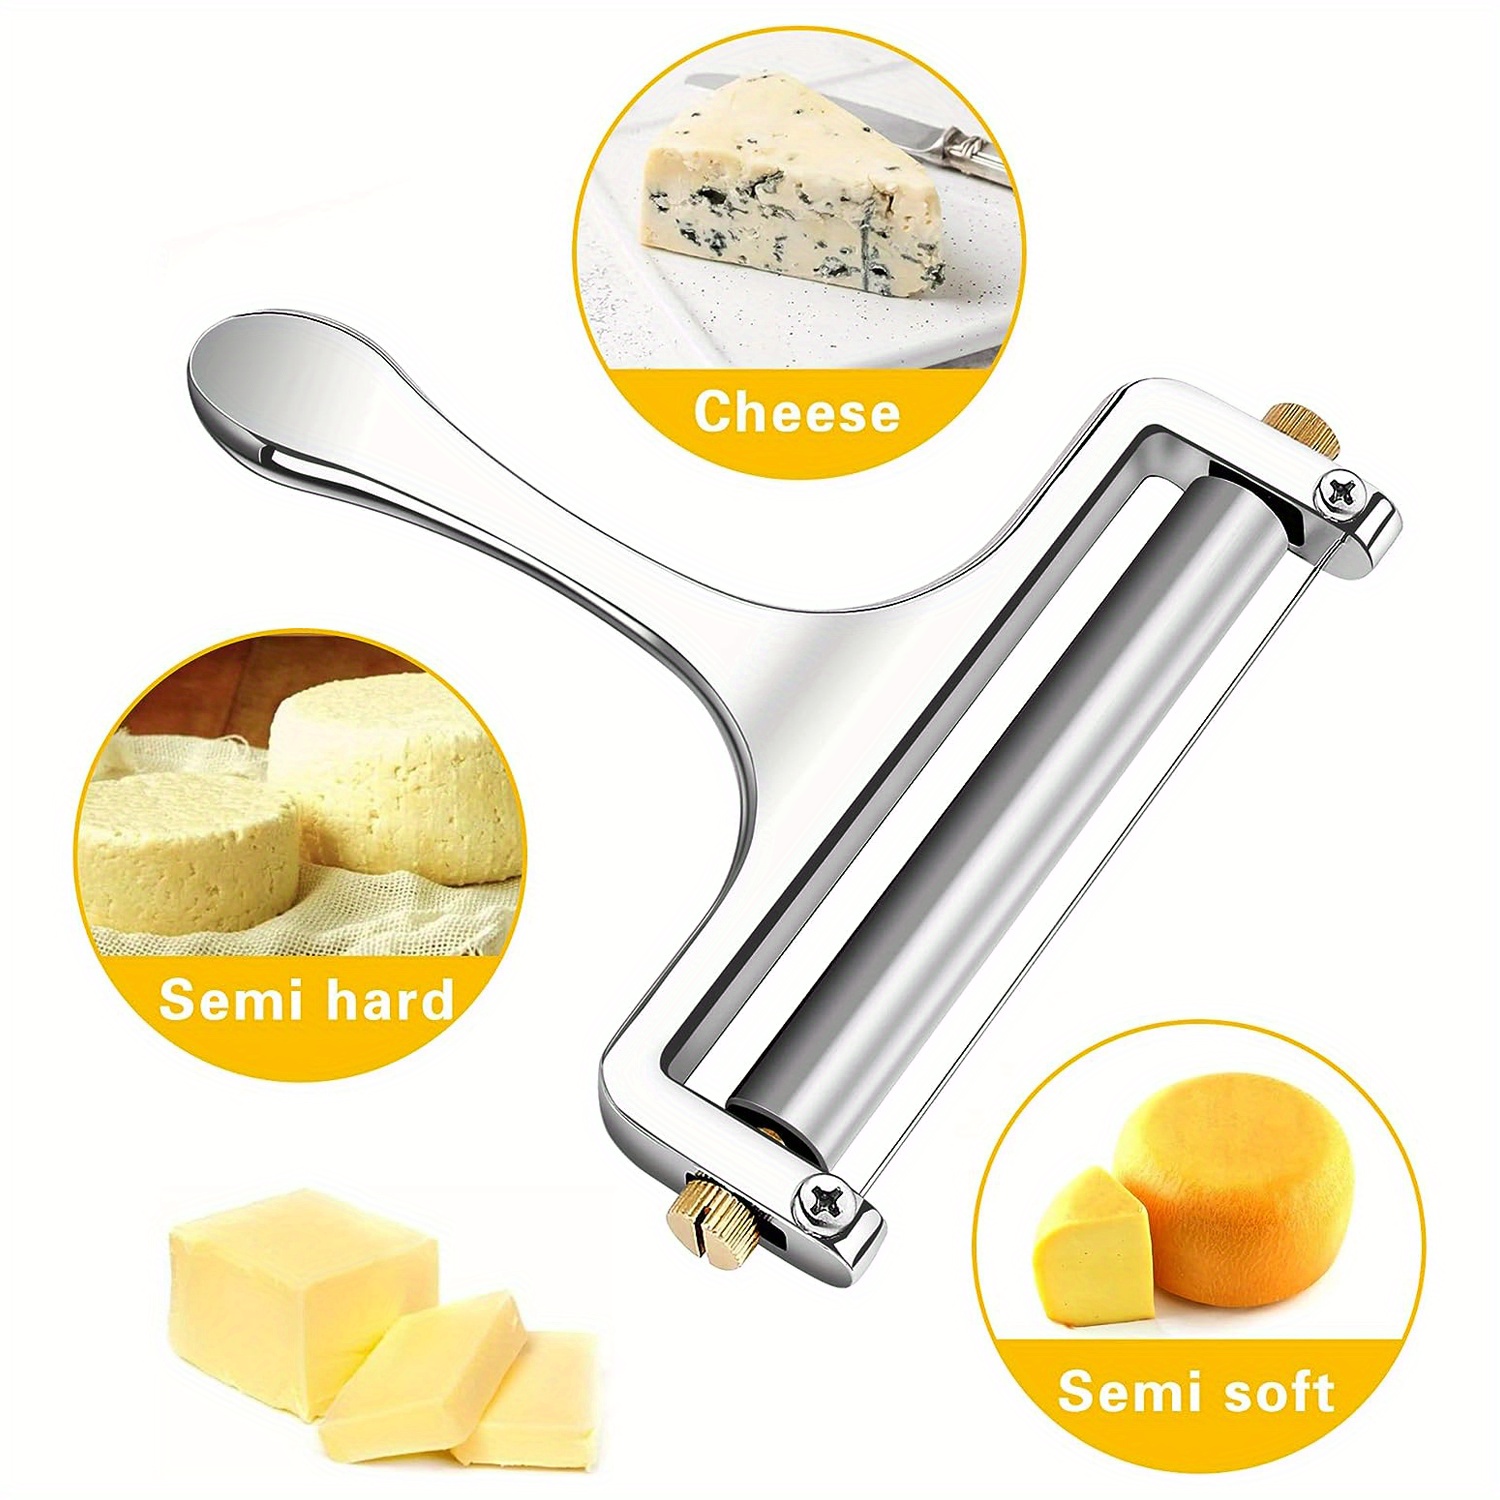 Cheese Curler